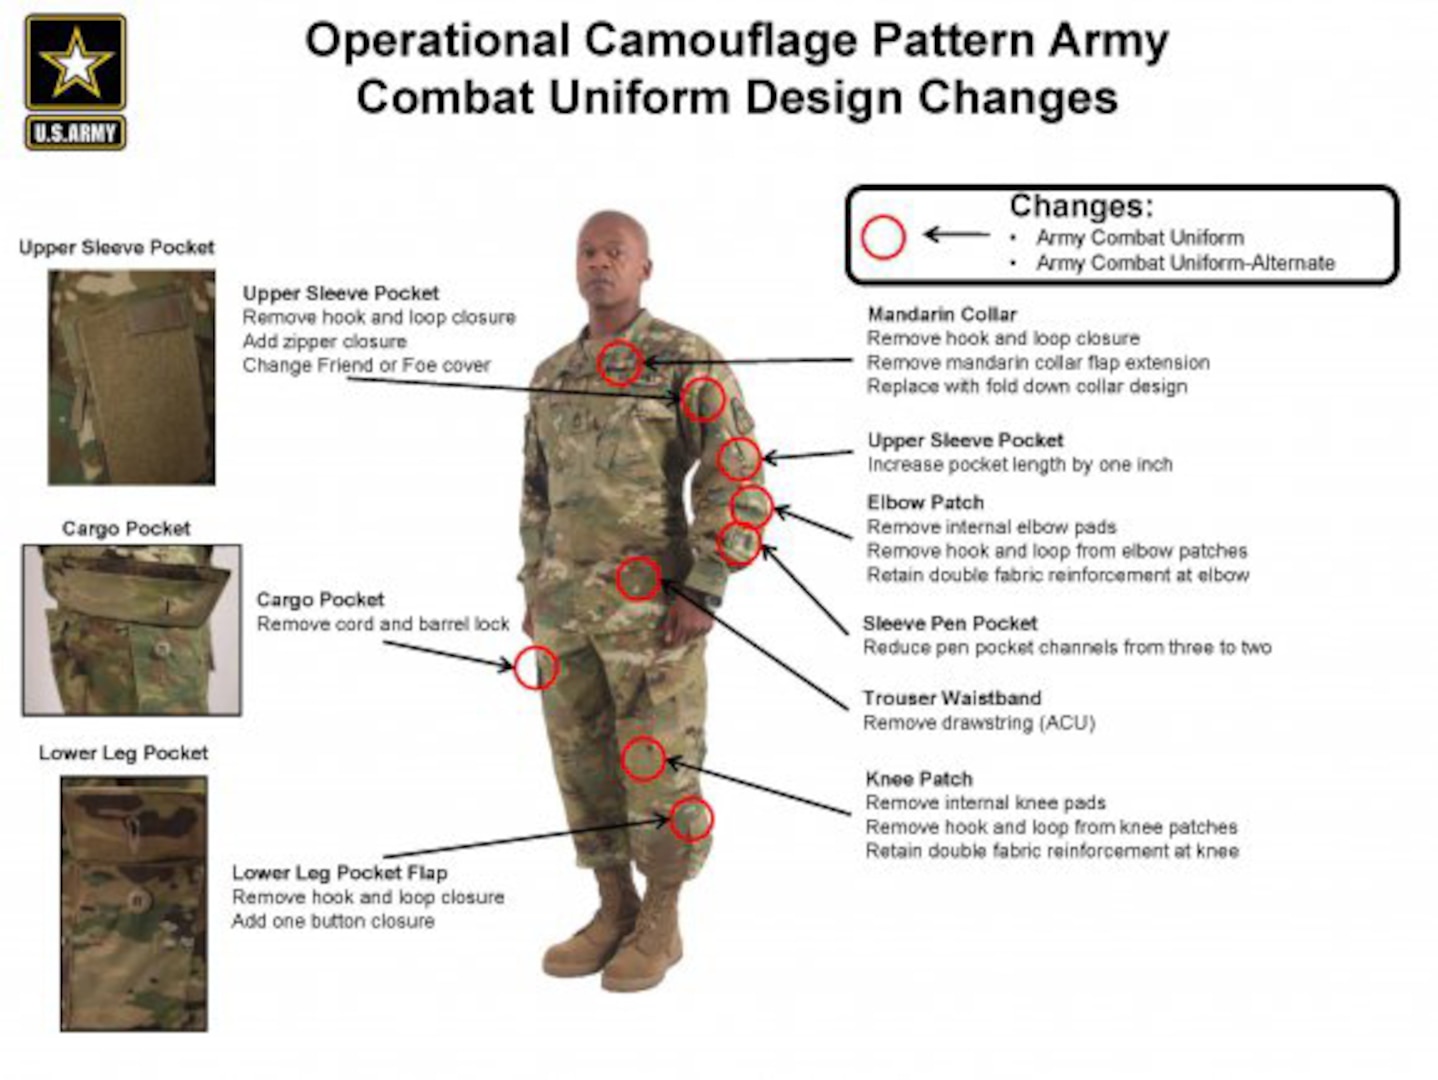 The irresponsibly stupid and dangerous camouflage patterns of the U.S.  military